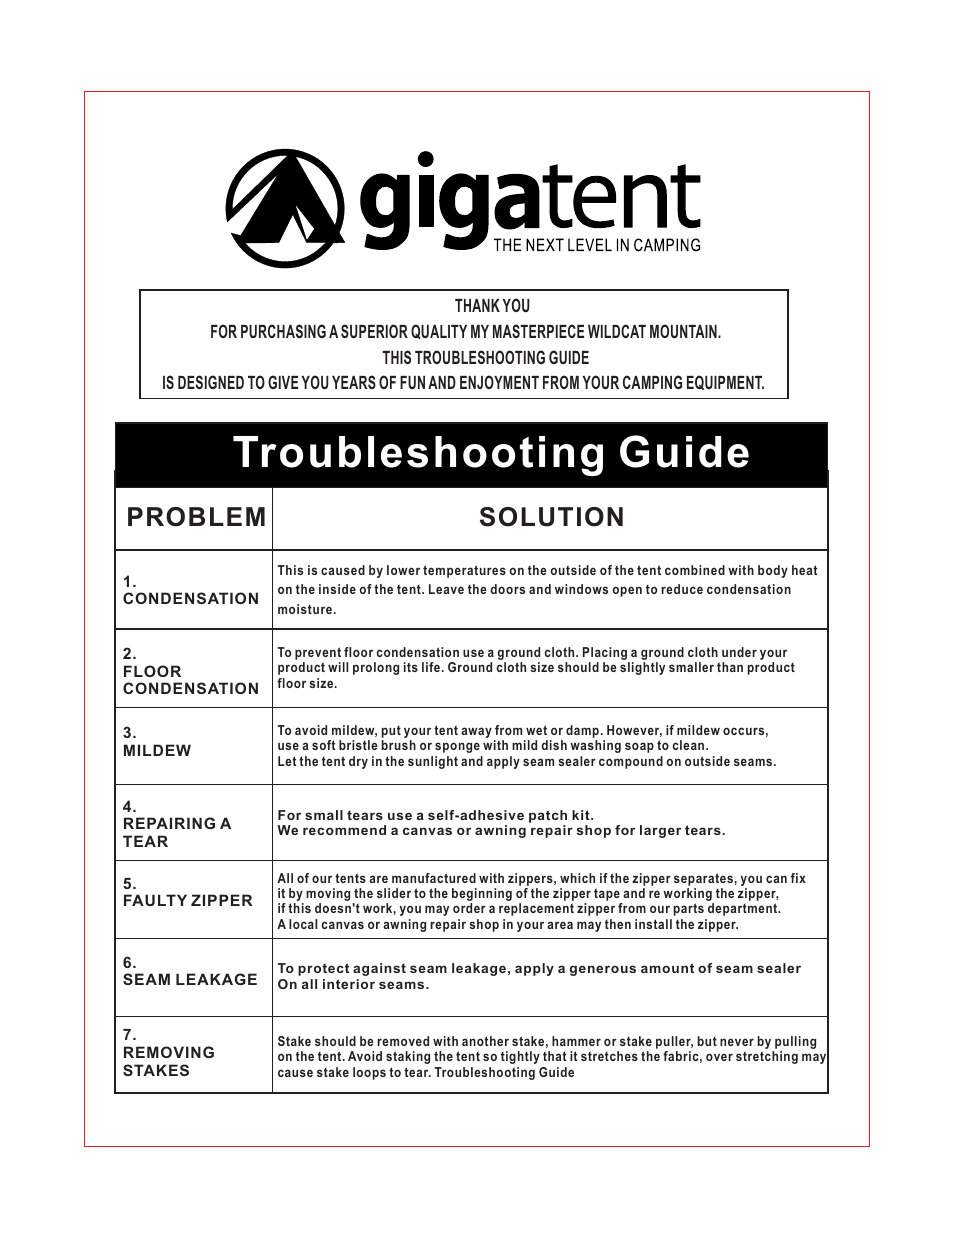 Troubleshooting guide, Problem solution | Giga Tent BT 014 User Manual | Page 6 / 8